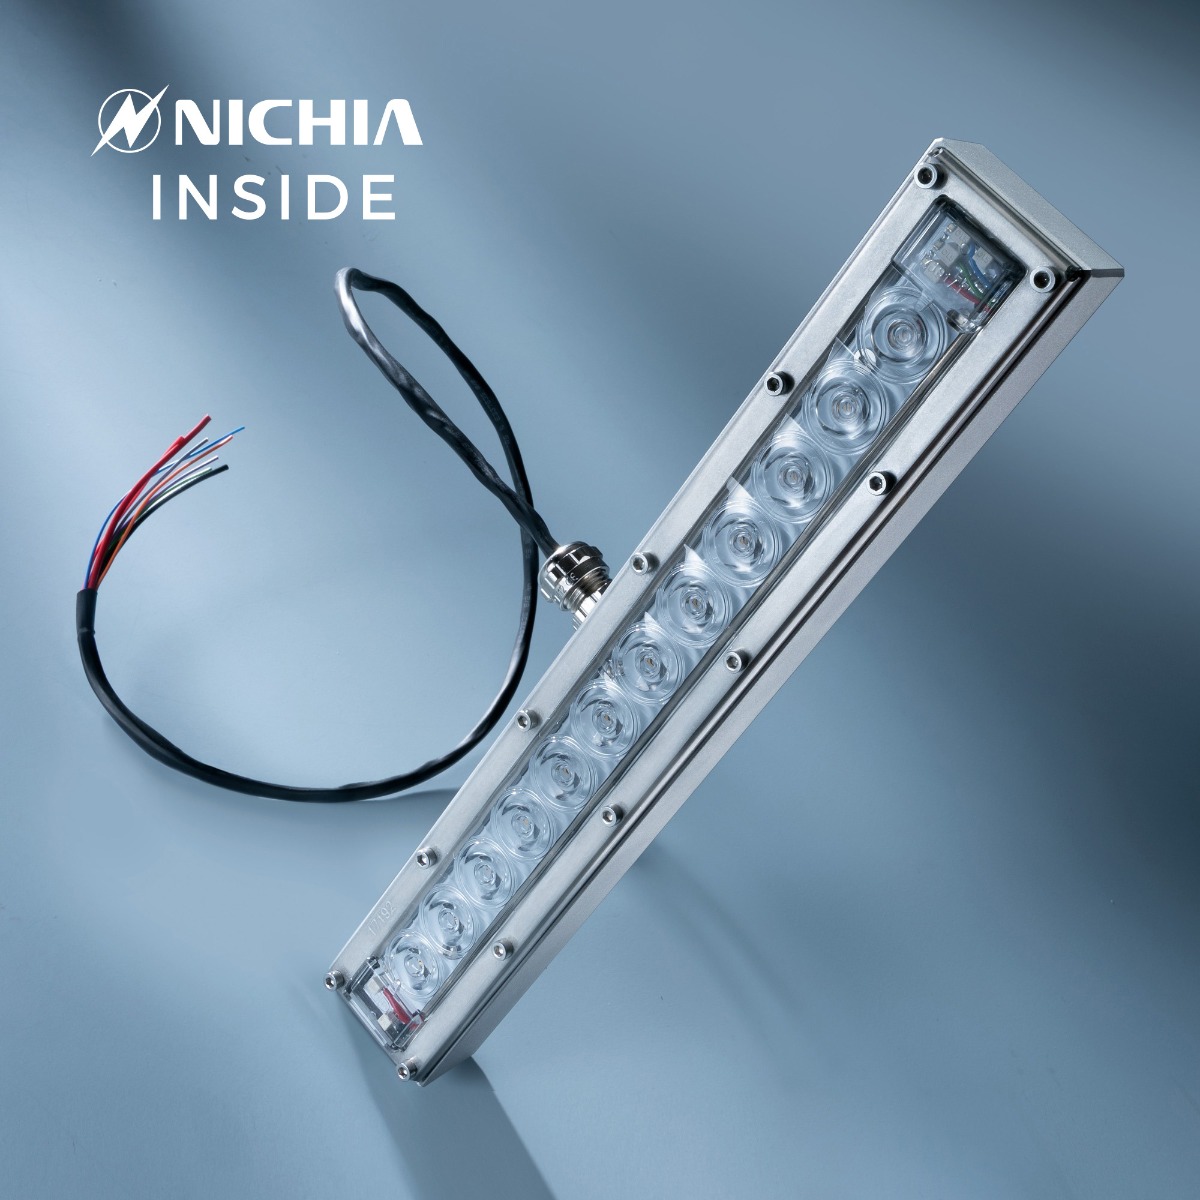 Violet UVC Nichia LED Module 280nm 12 LEDs NCSU334B 630mW 11.69" 48VDC IP67 with controler incl., for disinfection and sterilisation 